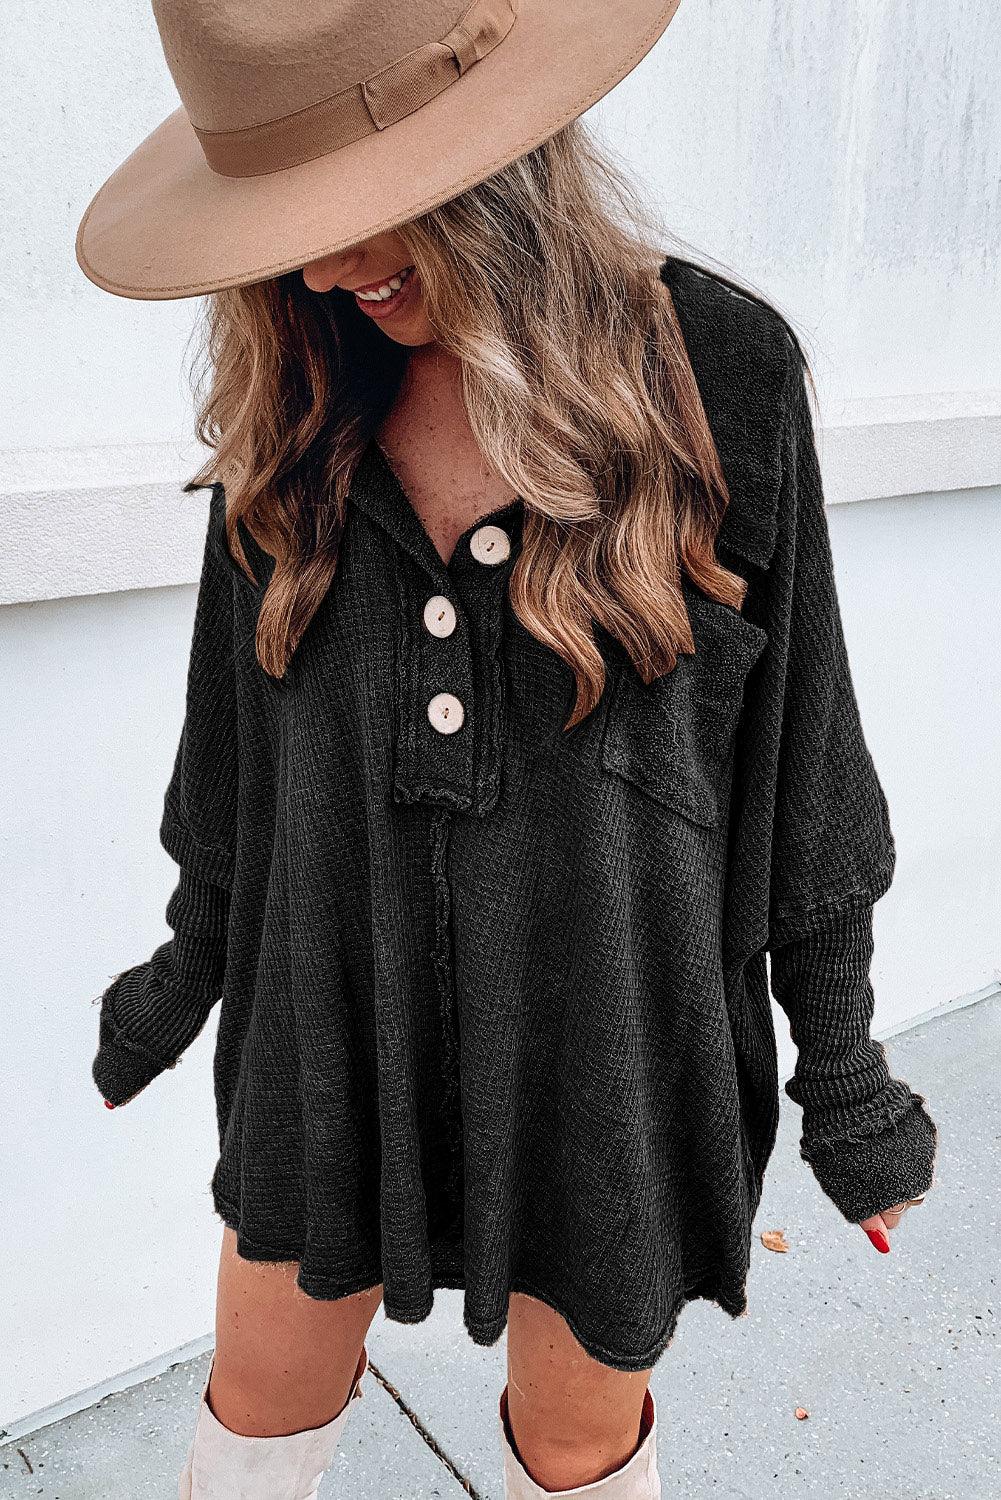 Brown Waffle Knit Buttoned Long Sleeve Top - L & M Kee, LLC